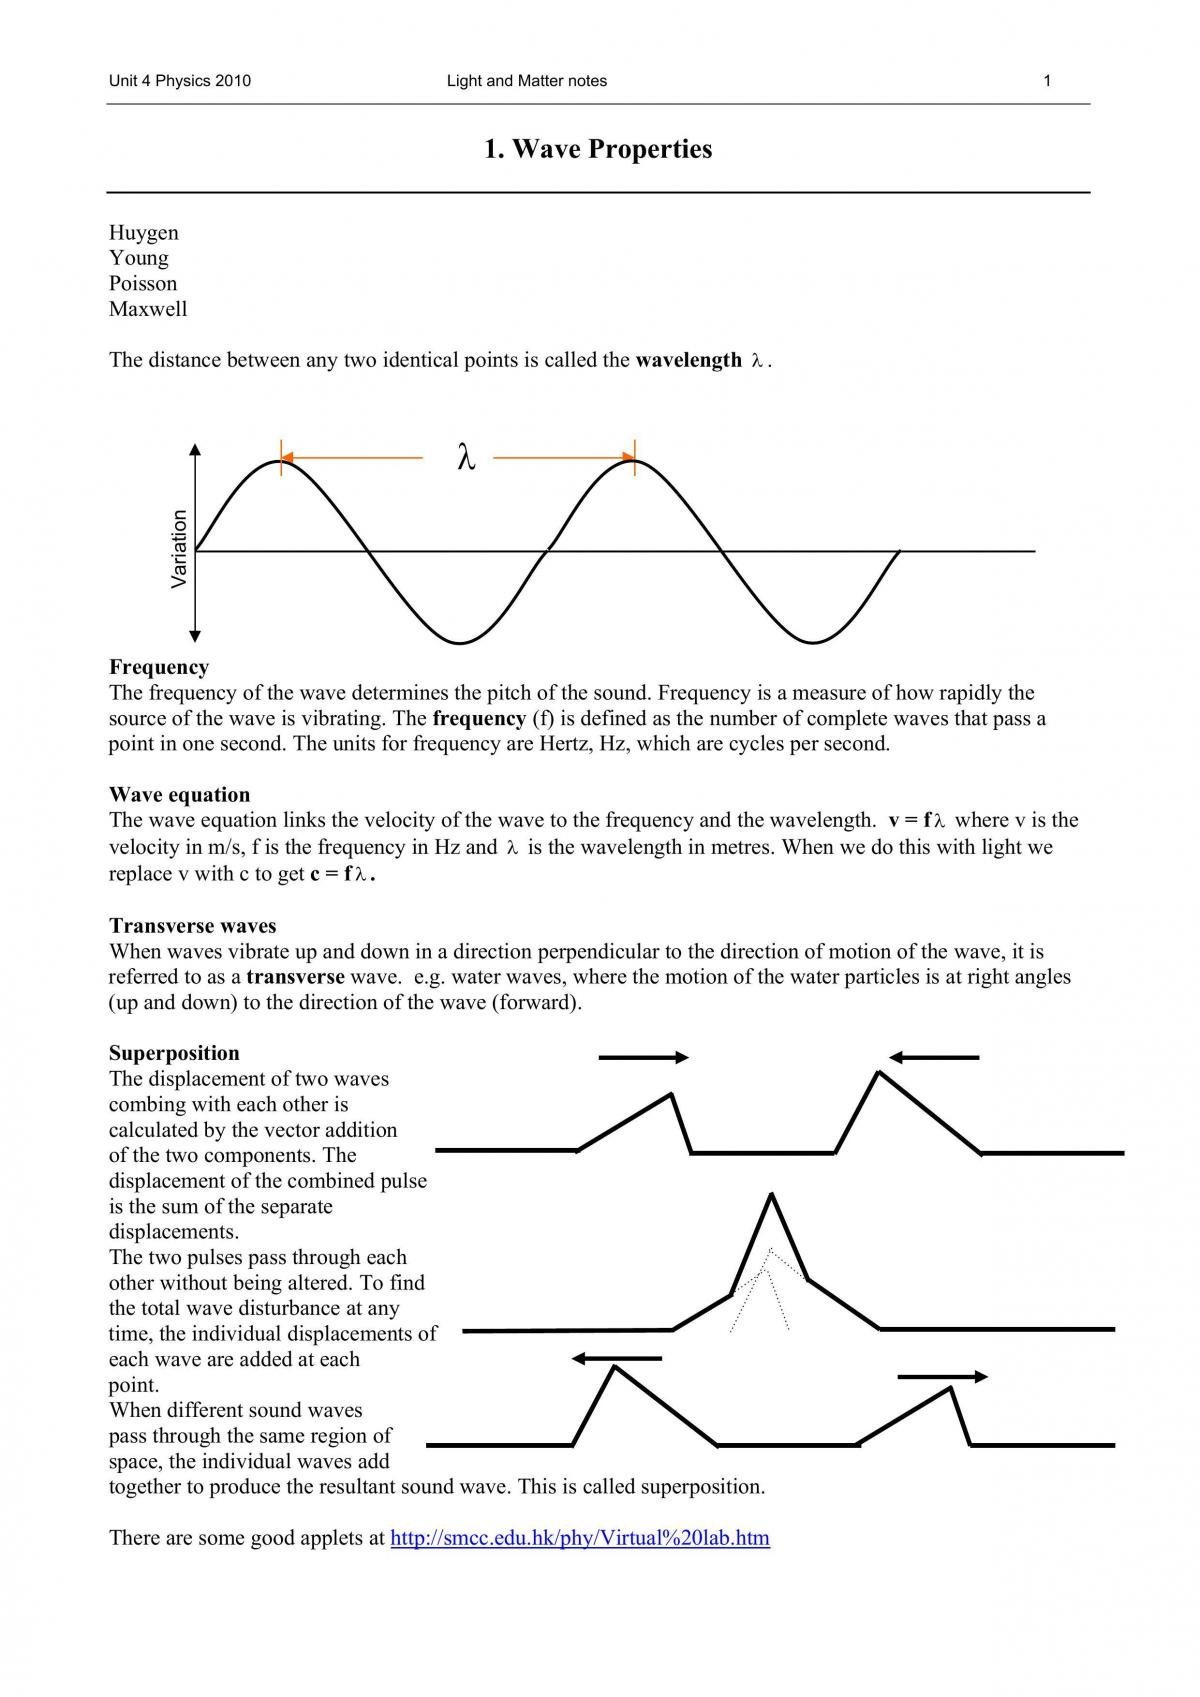 VCE Physics Light and Matter Summary - Page 1